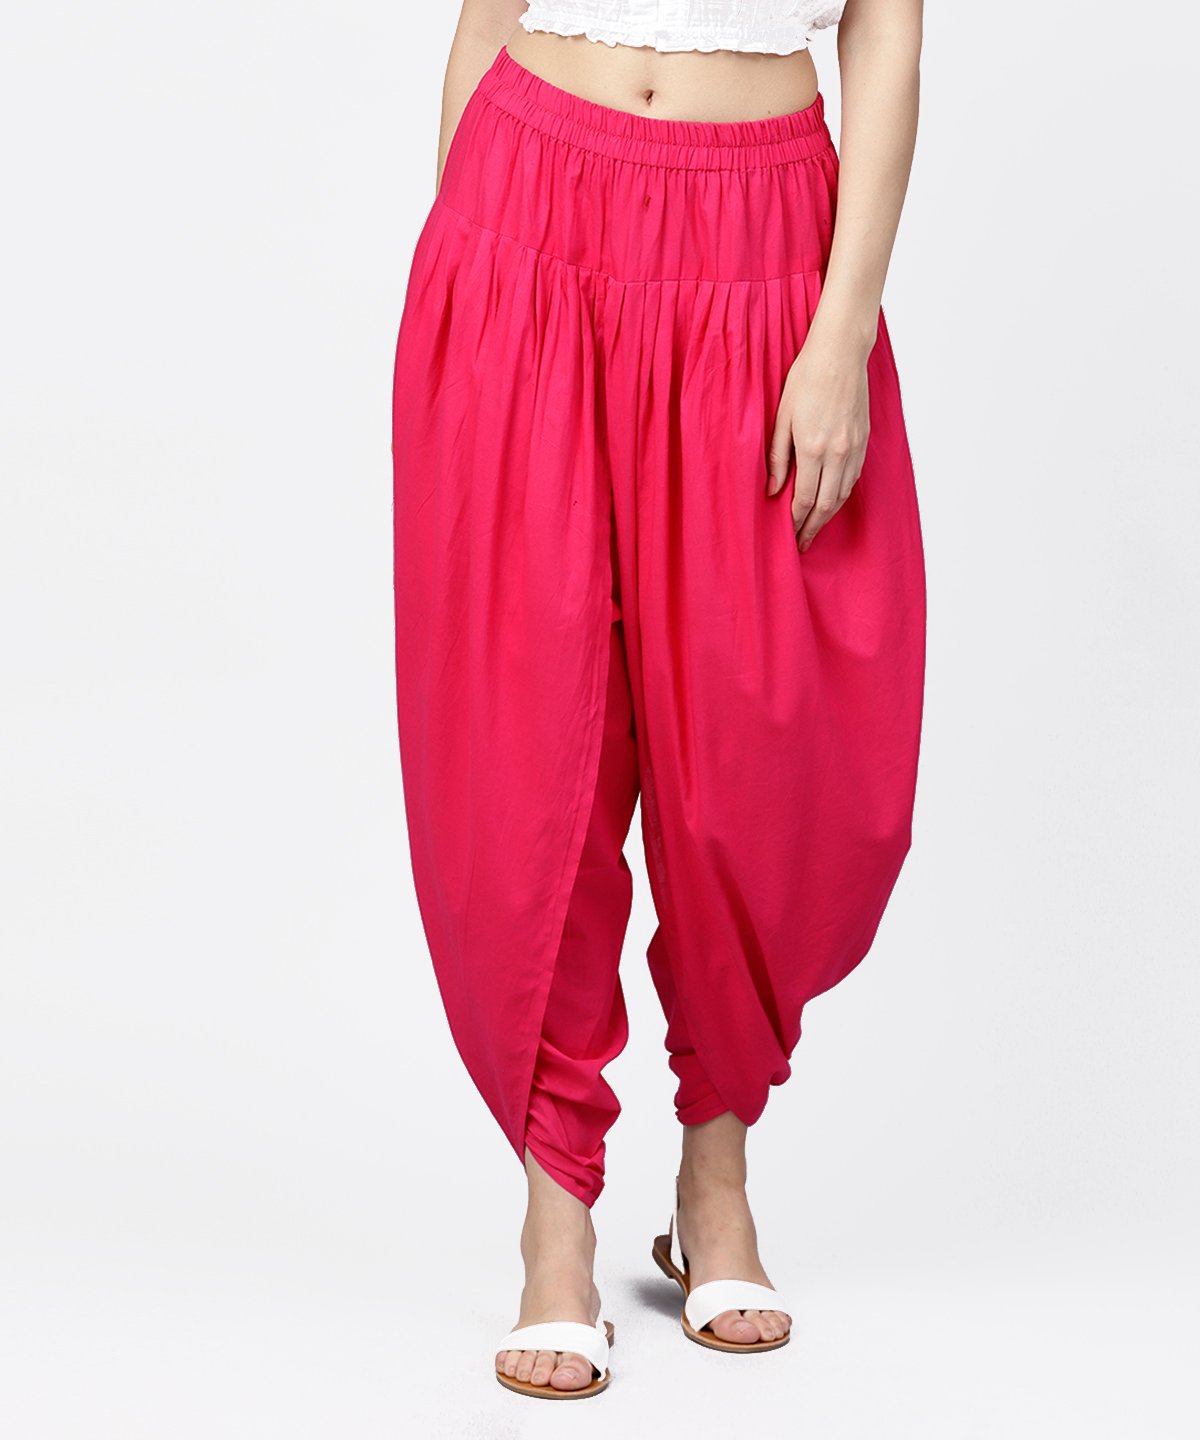 Women's Solid Rani Pink Ankle Length Cotton Dhoti Pant - Nayo Clothing